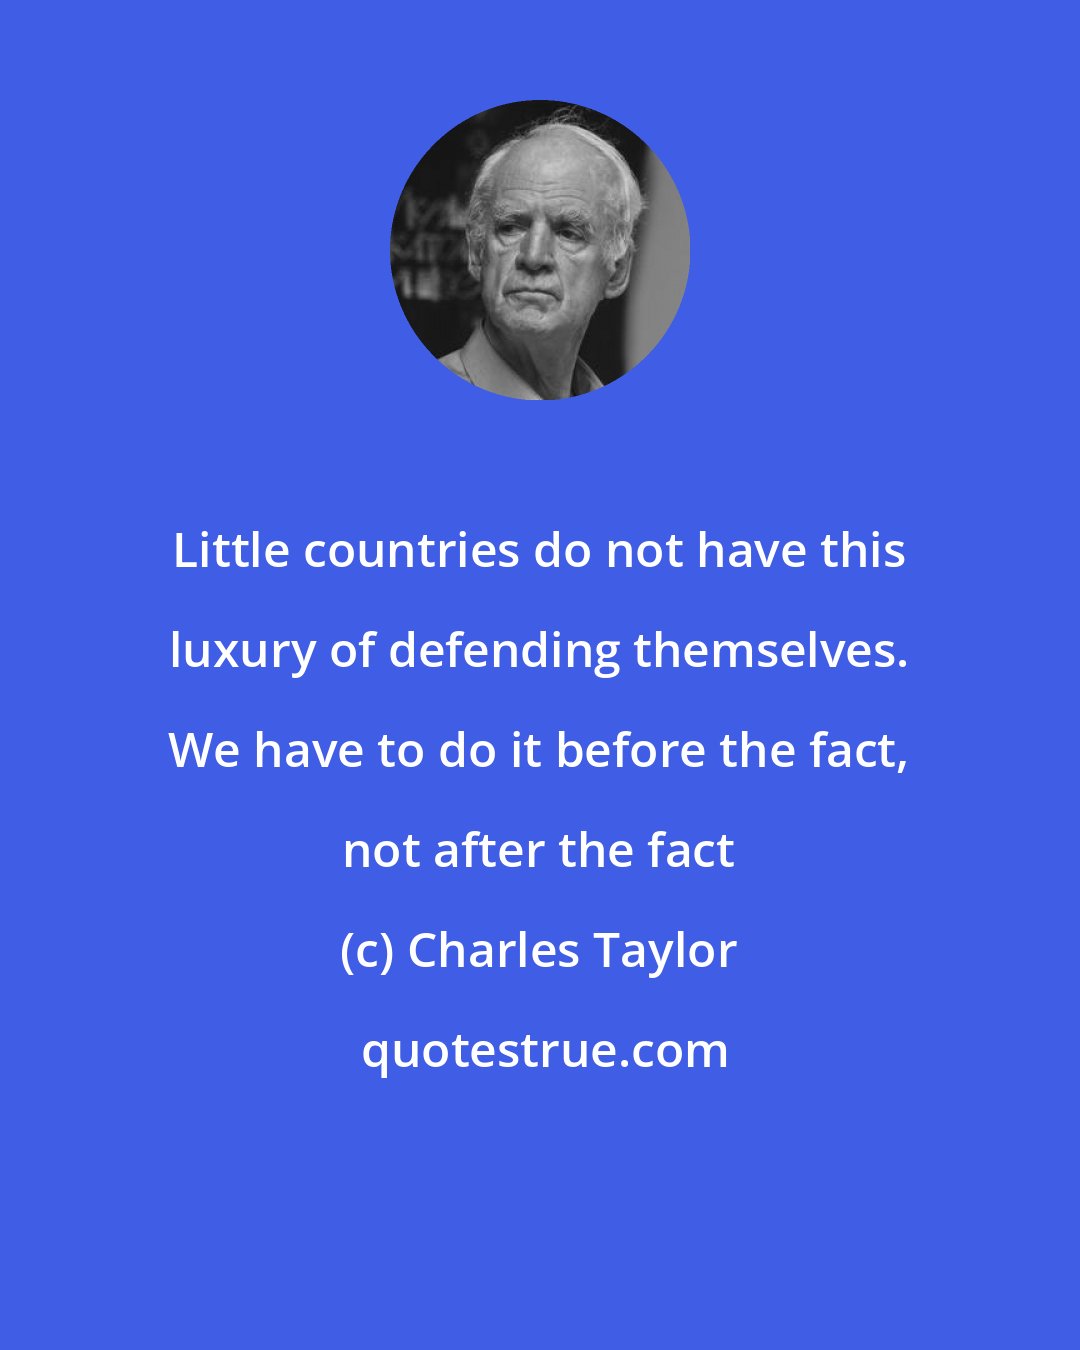 Charles Taylor: Little countries do not have this luxury of defending themselves. We have to do it before the fact, not after the fact